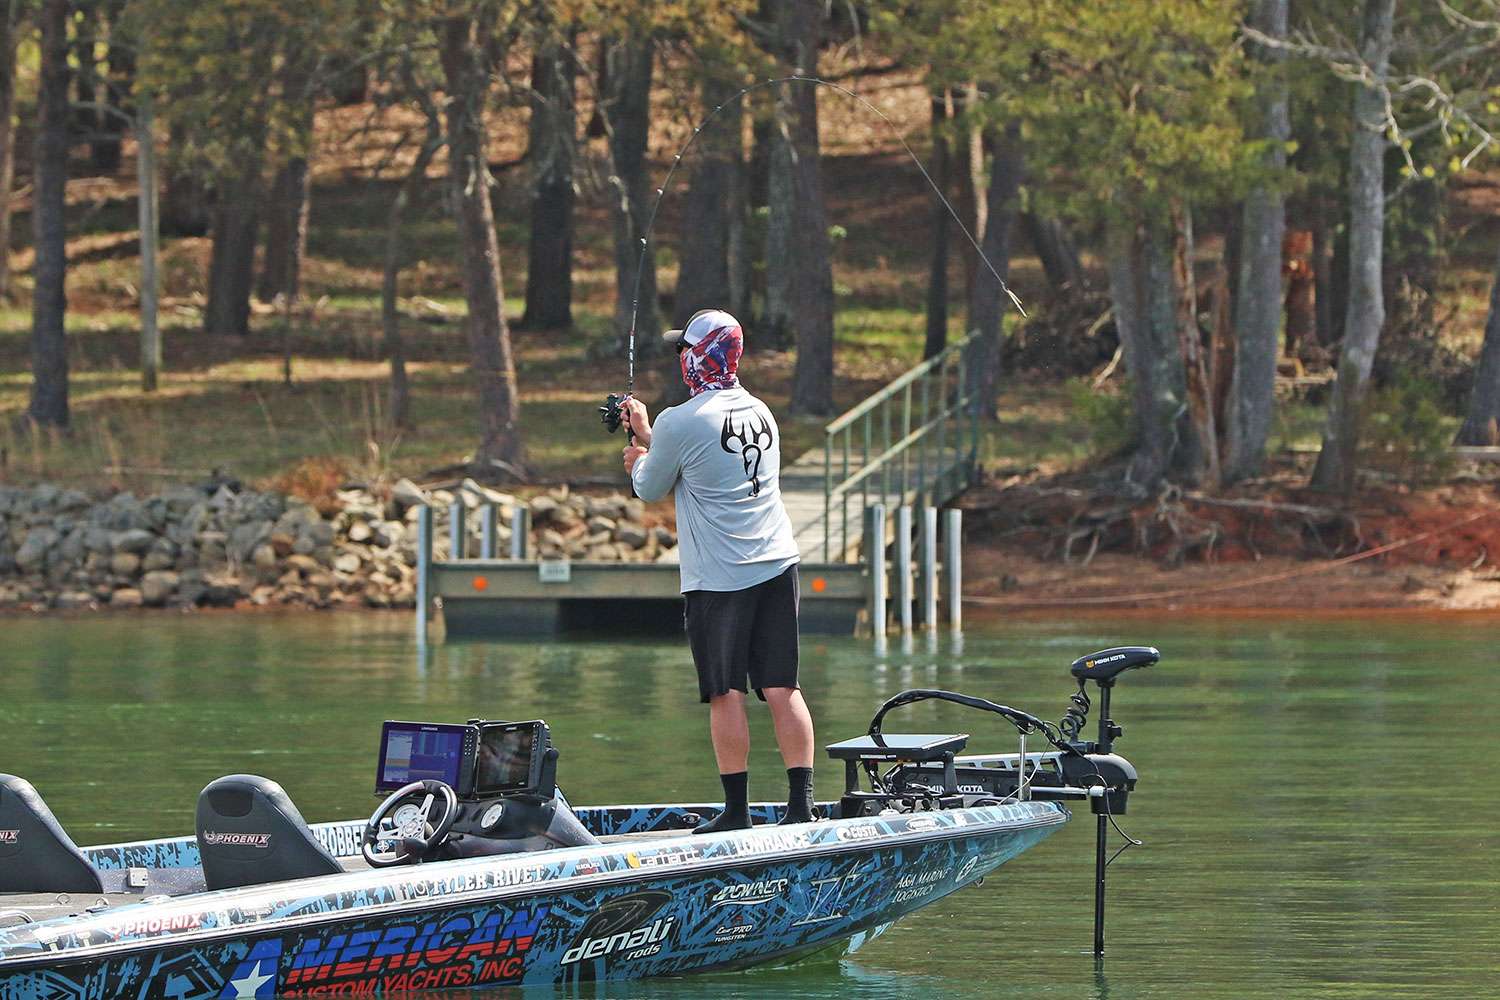 Tyler Rivet had a great Day 1 at the 2019 Bassmaster Elite at Lake Hartwell, check out a few of his big catches late in the day to position him near the top of the leaderboard.